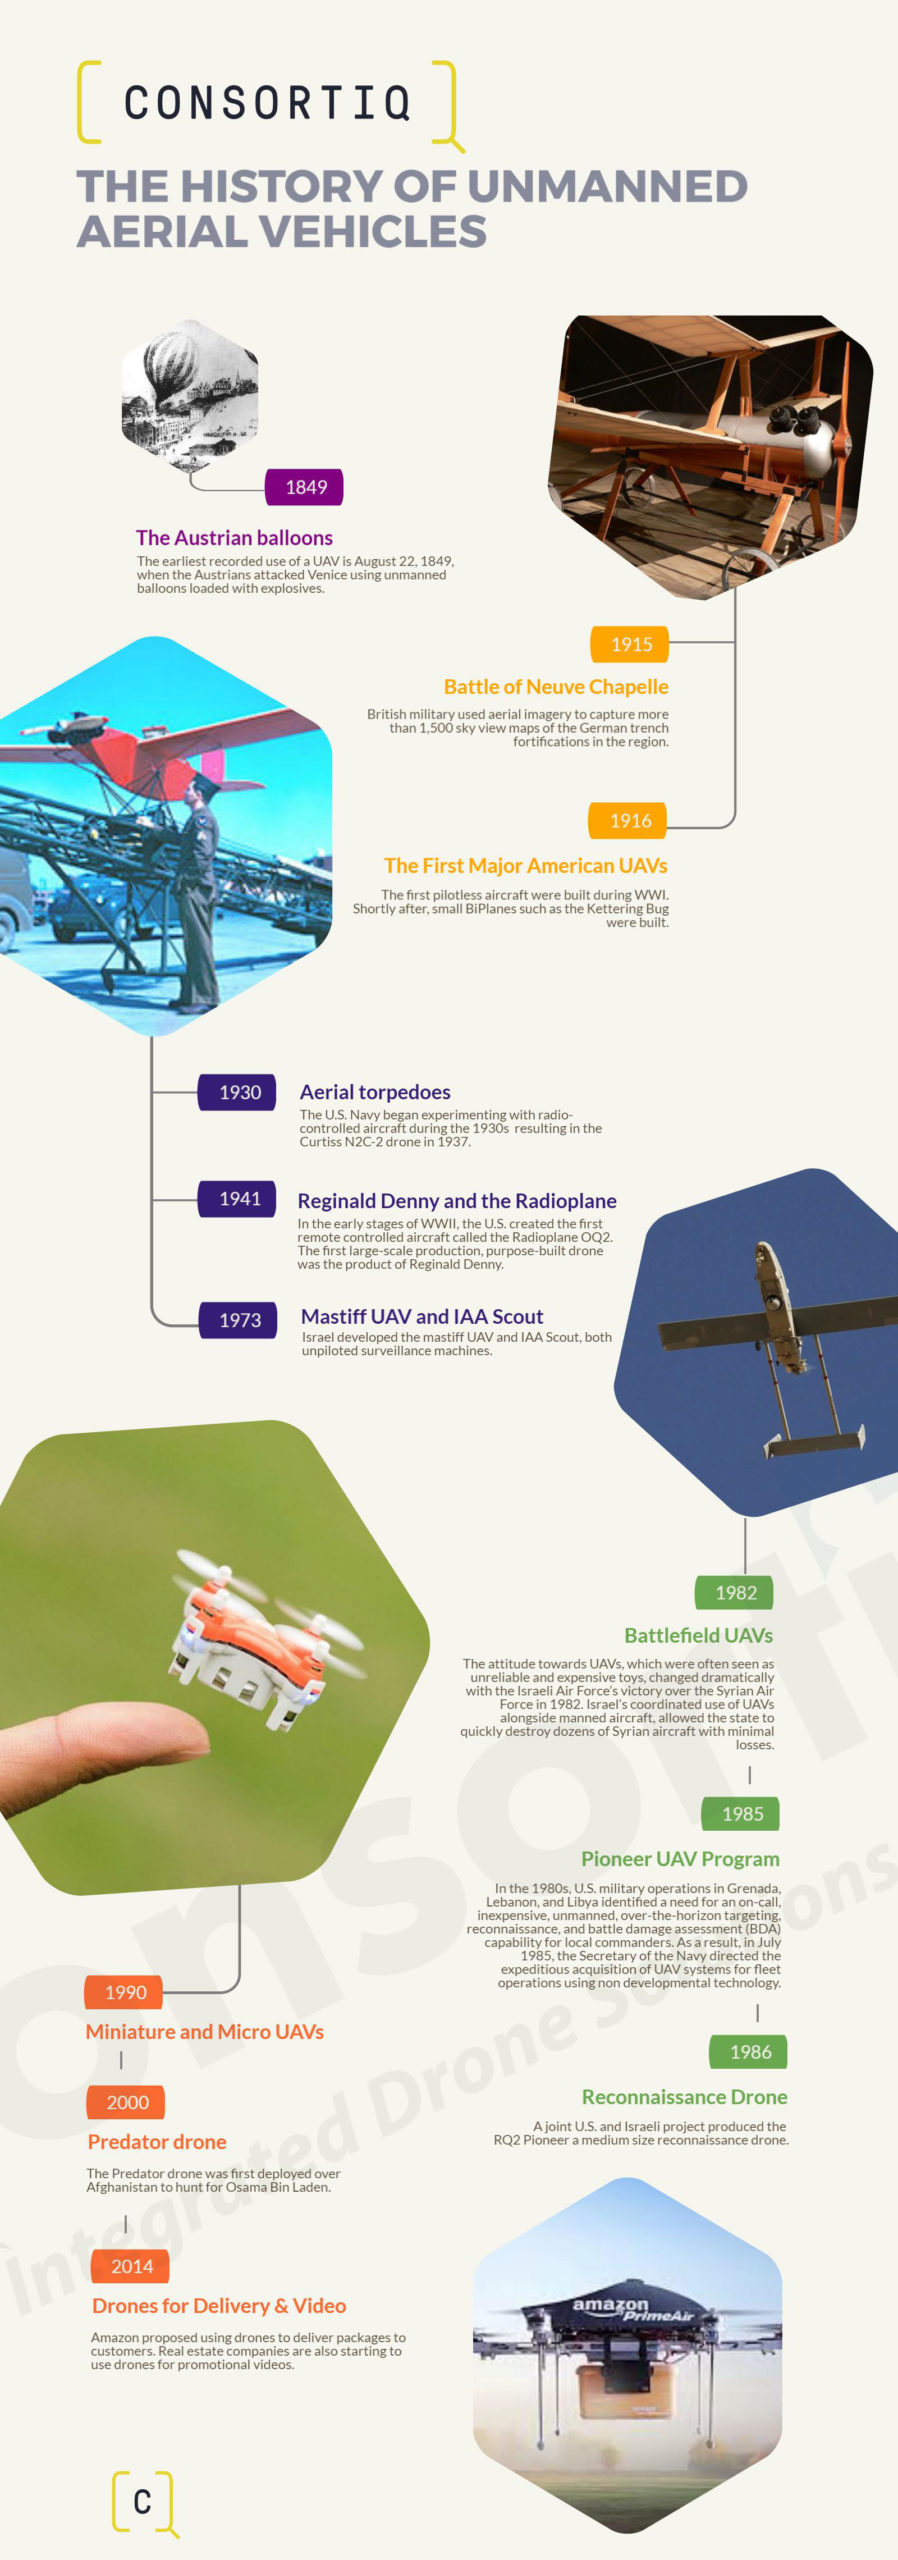 History of Unmanned Aerial Vehicles - Consortiq